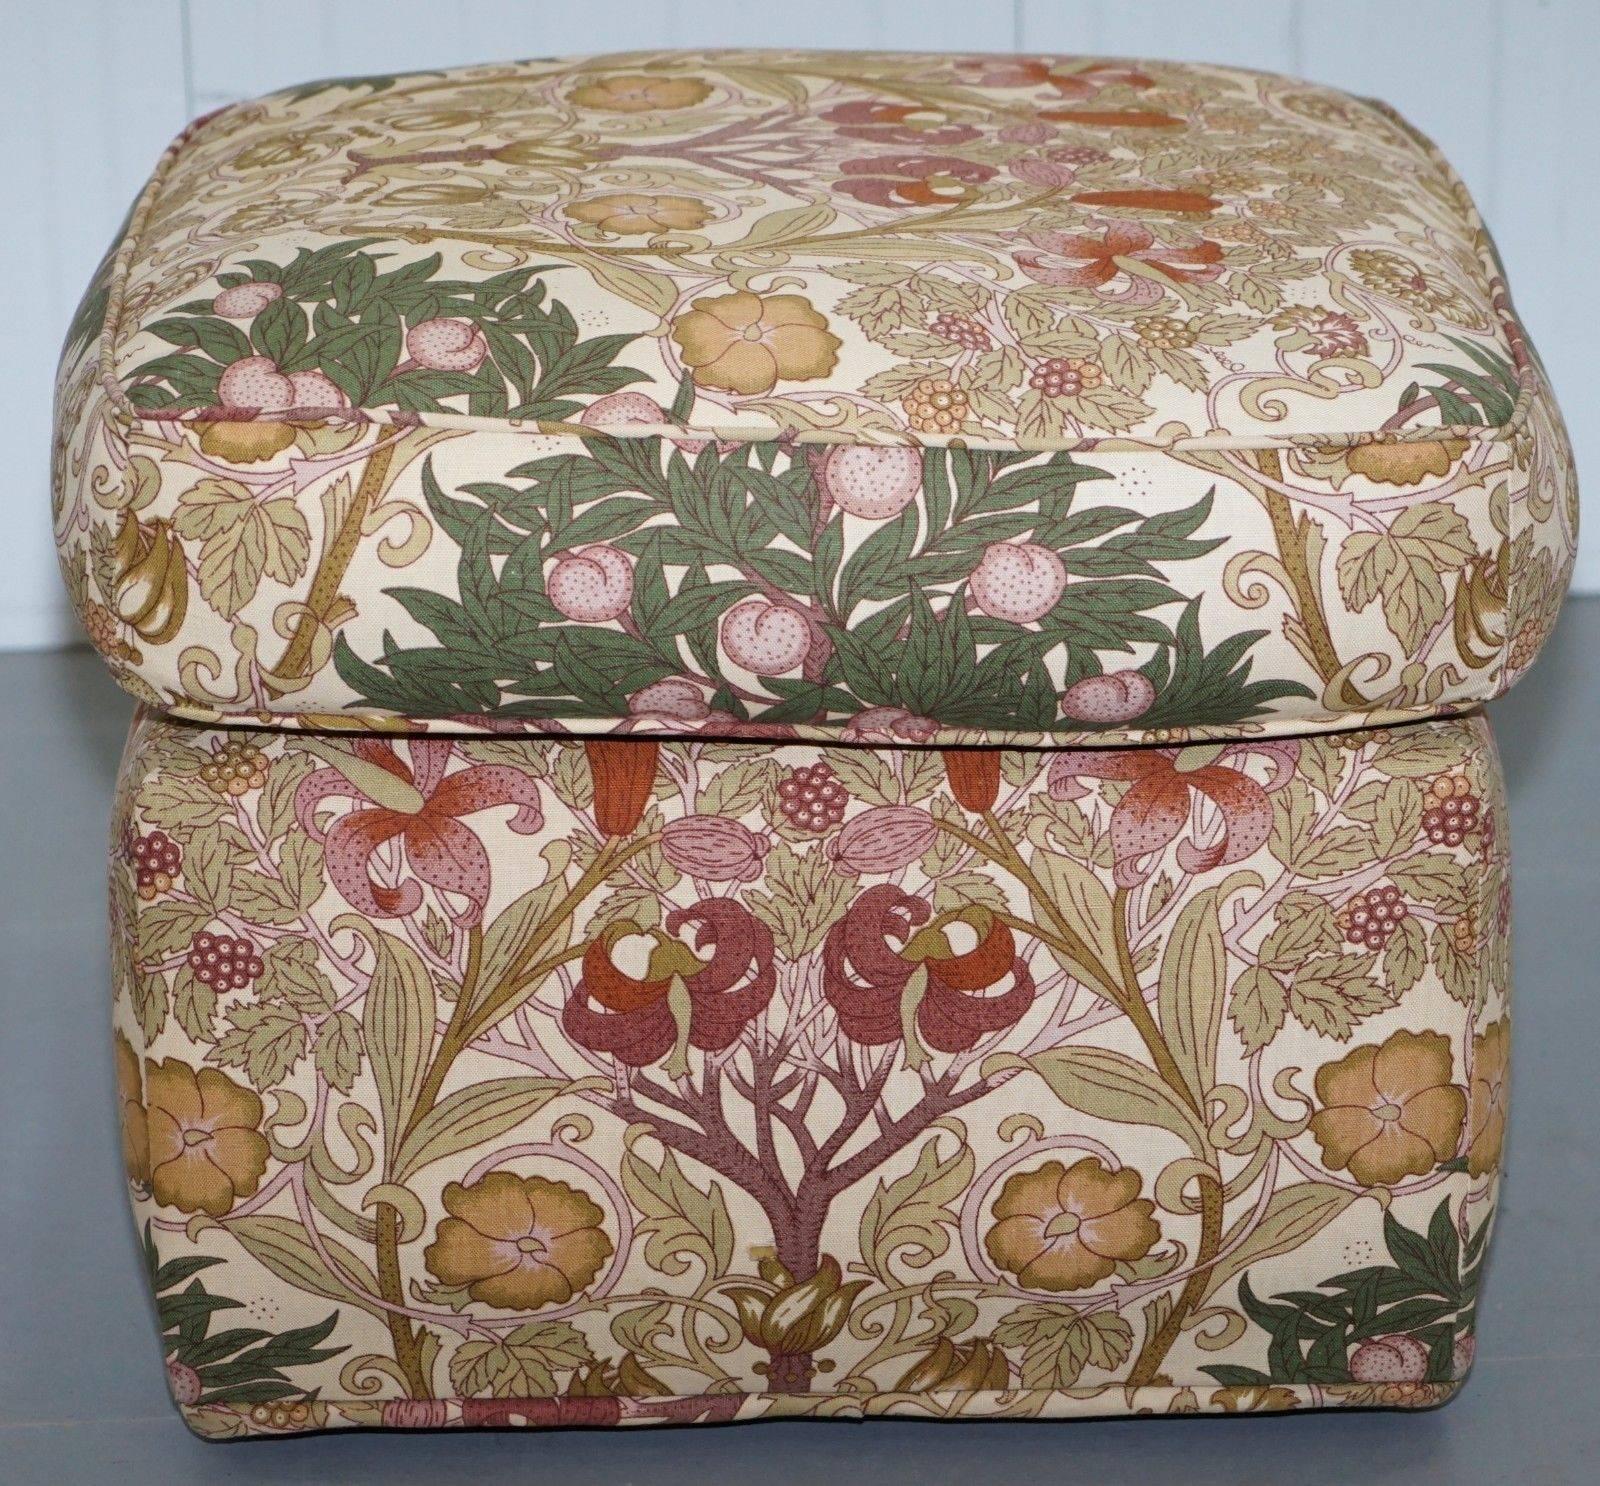 Fabric Liberty's London Floral Upholstered Footstool Ottoman Kendrick Part of a Suite